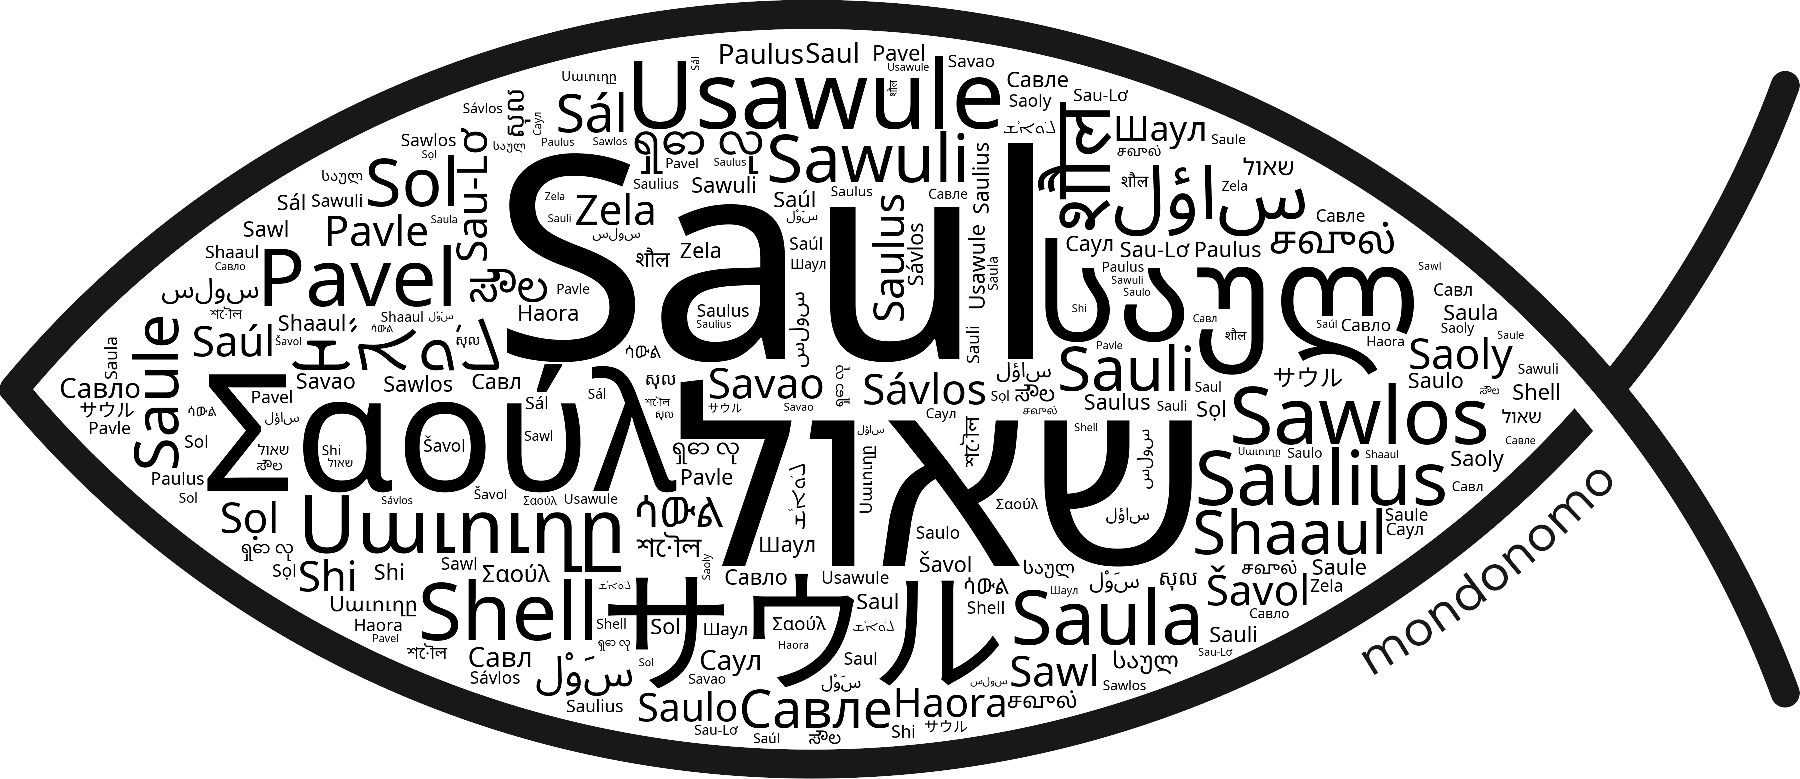 Name Saul in the world's Bibles